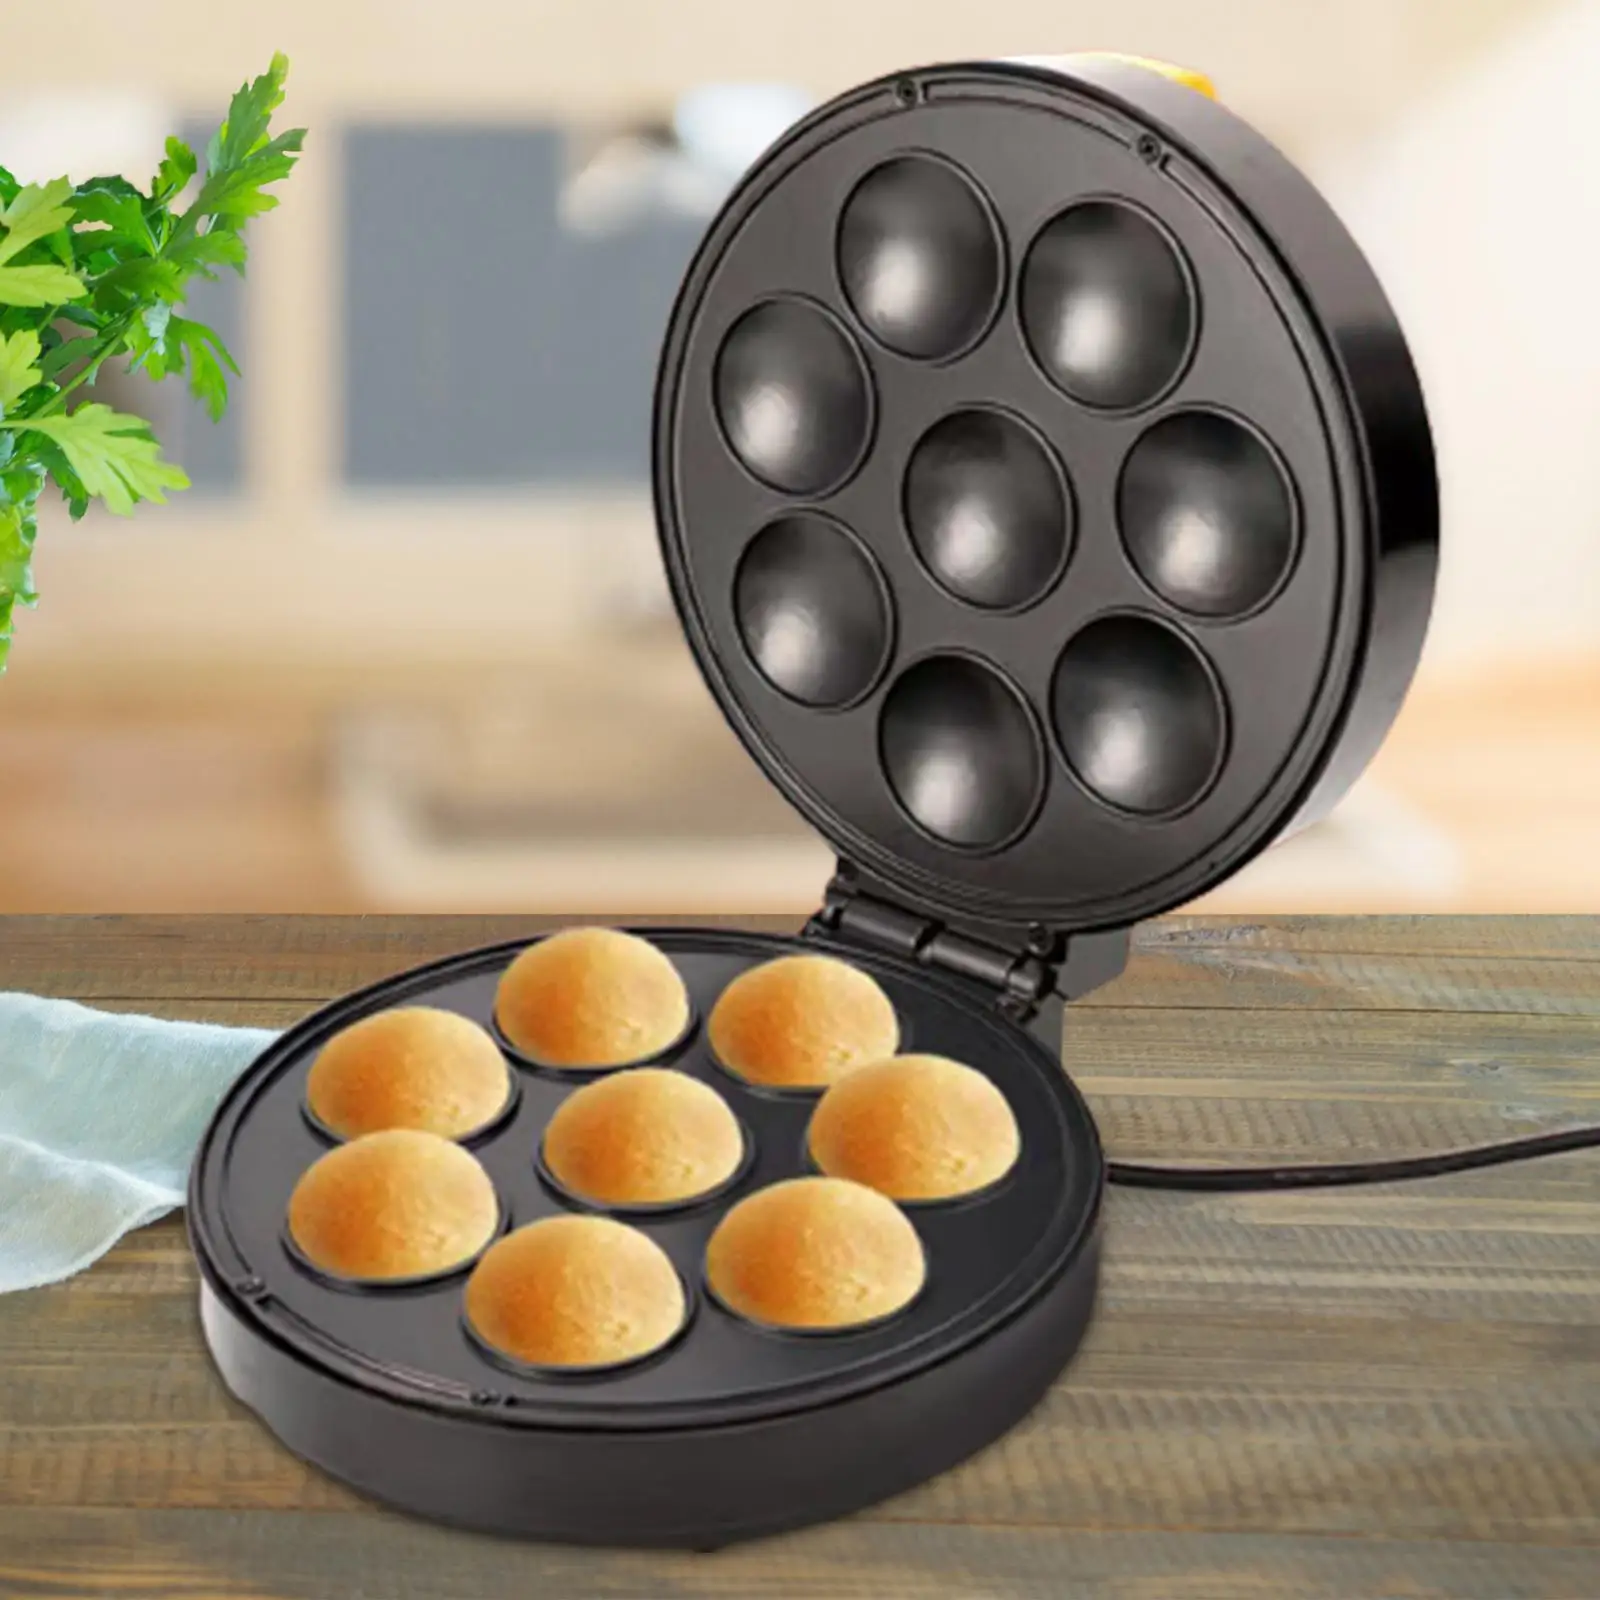 Donut Maker Machine Nonstick Surfaces Dessert or Snack Making Electric Small Doughnuts Maker Bread Maker for Kids and Adults